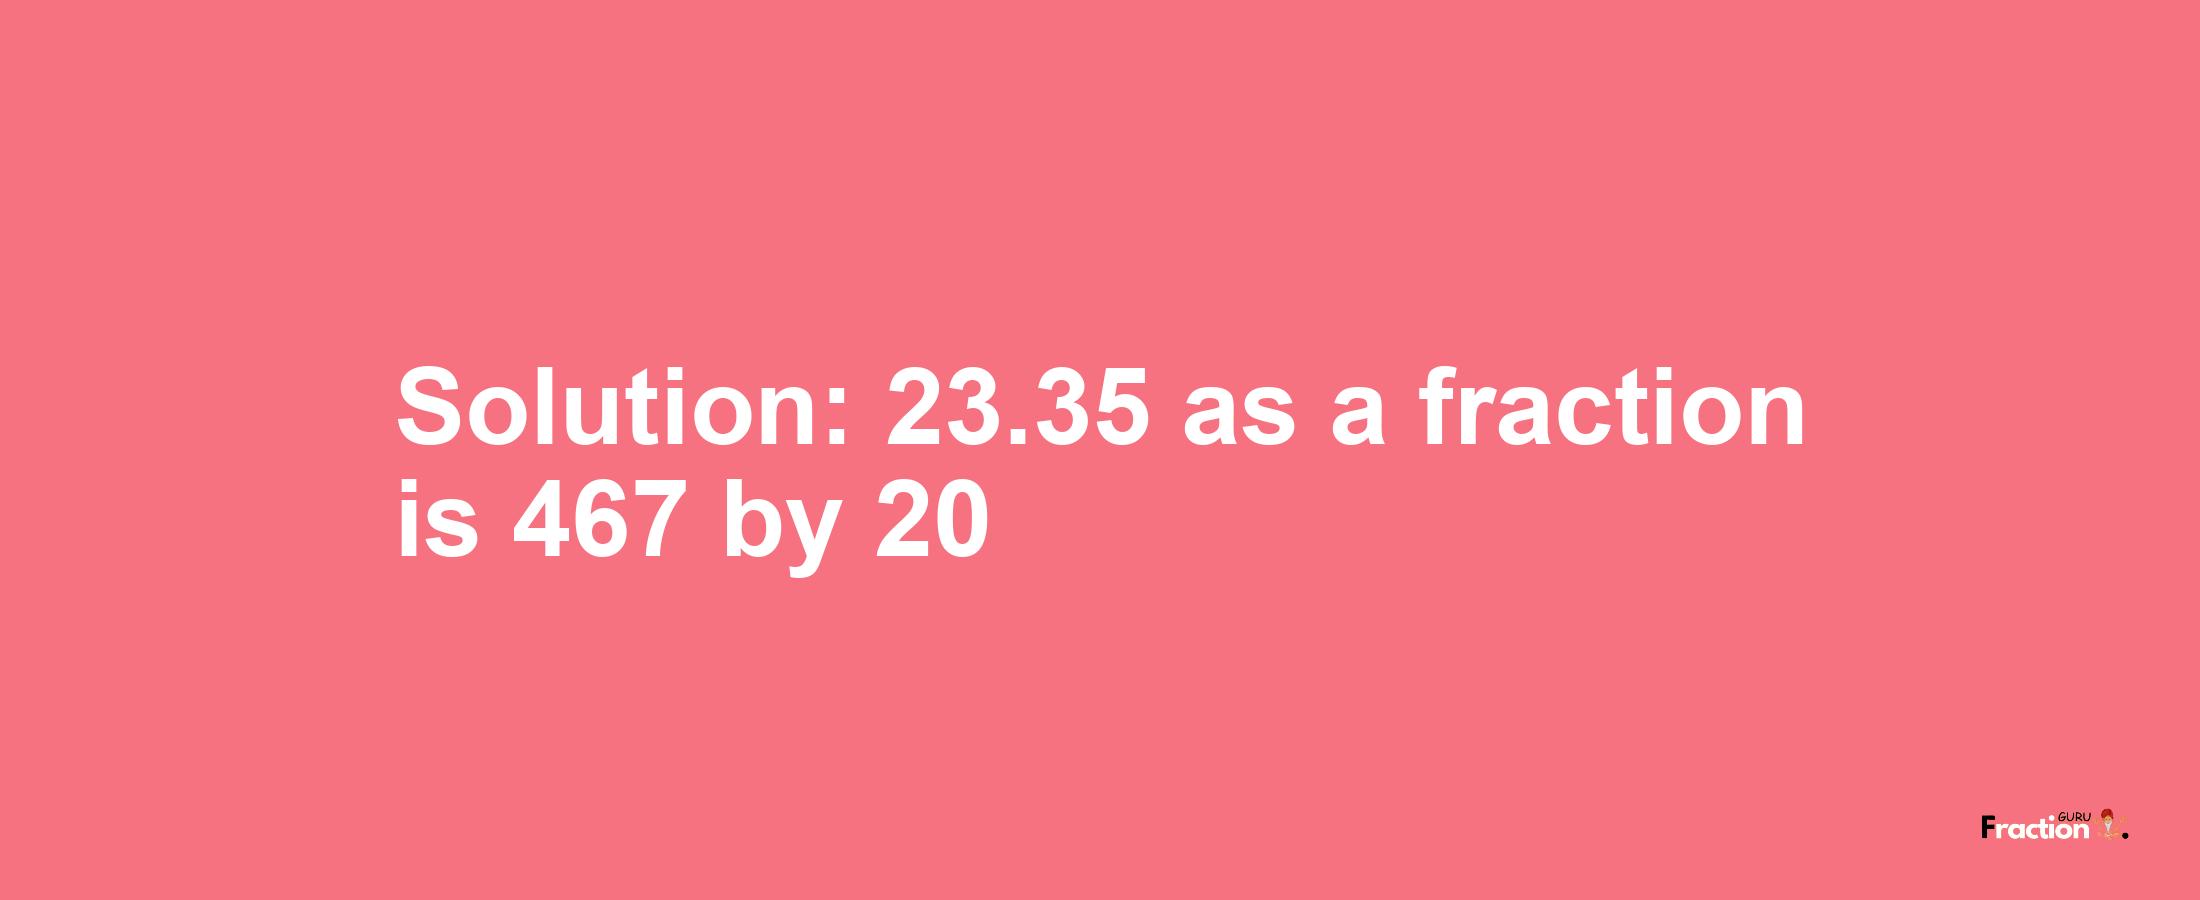 Solution:23.35 as a fraction is 467/20